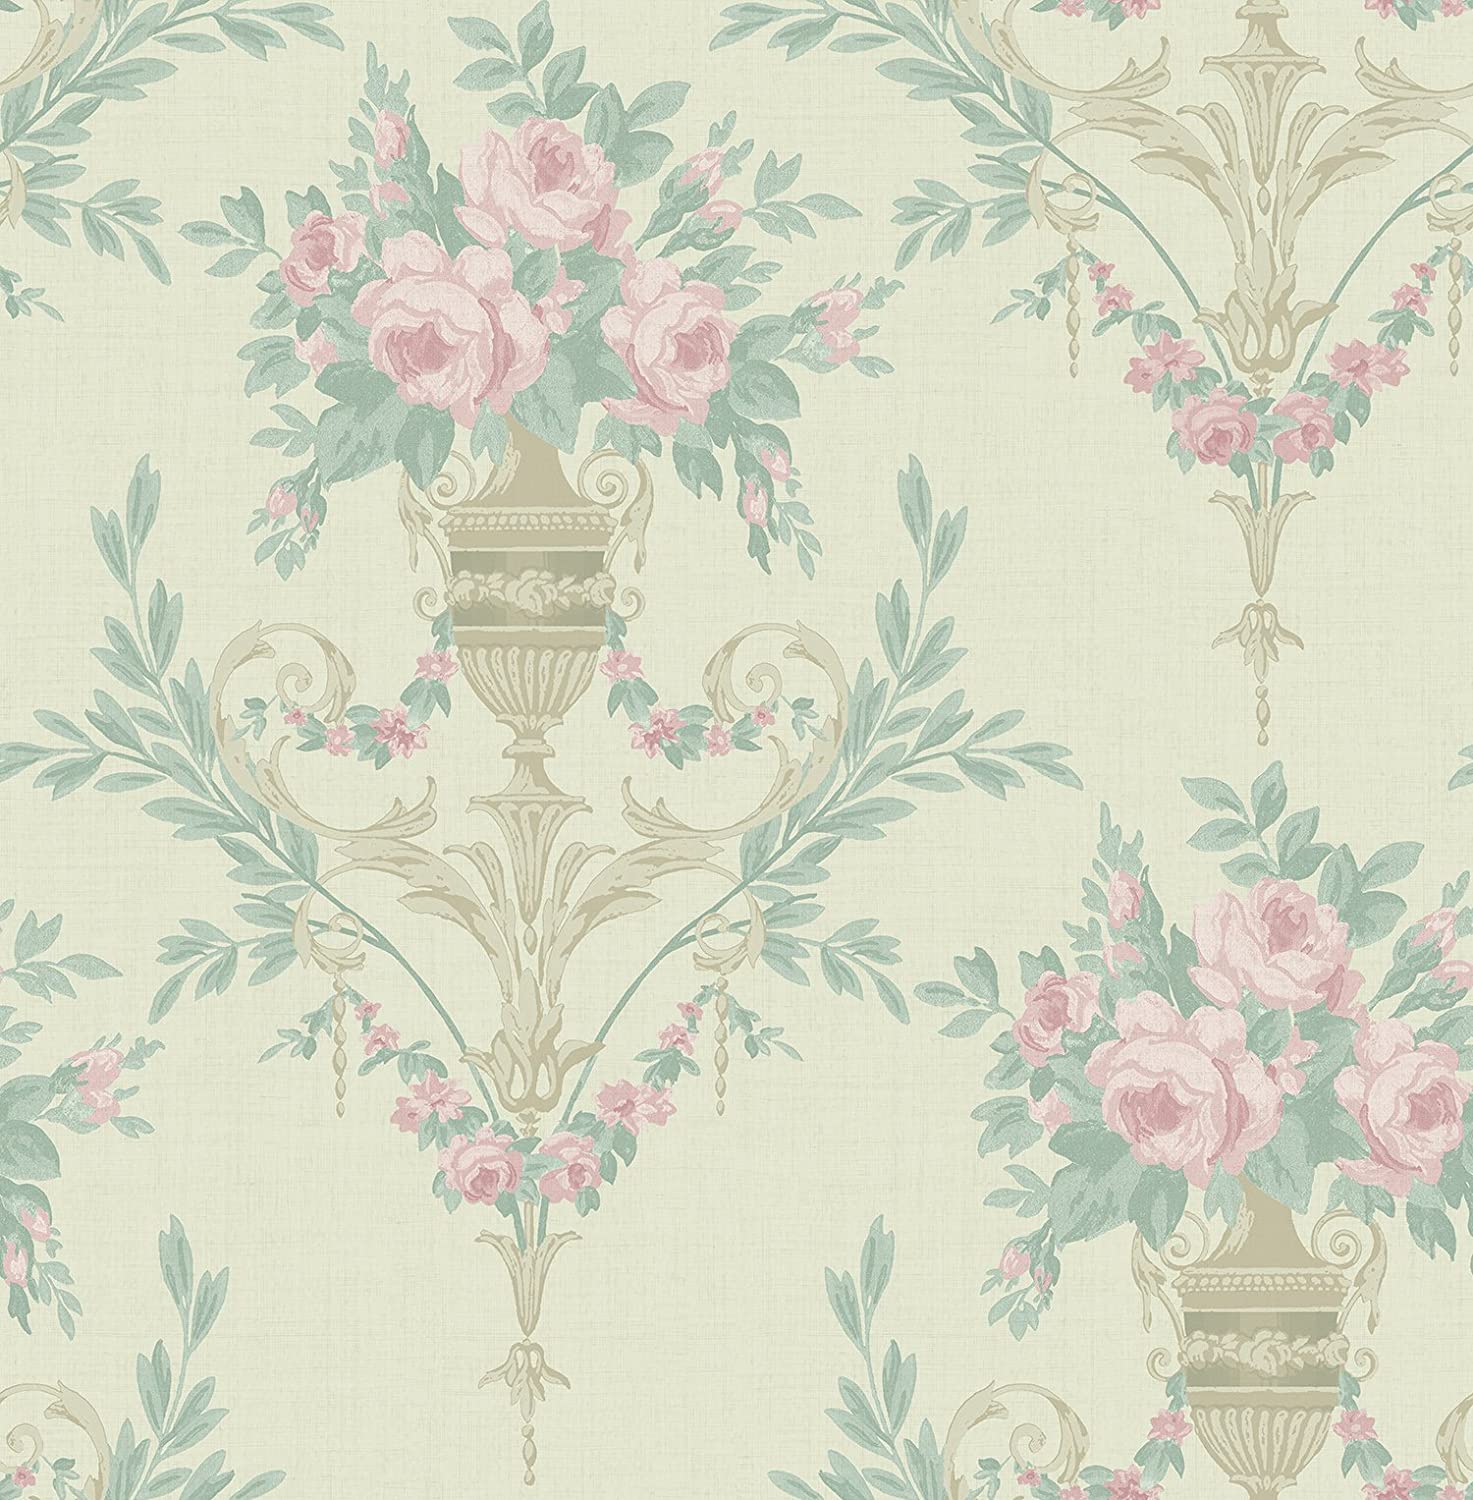 Victorian Old Wallpapers